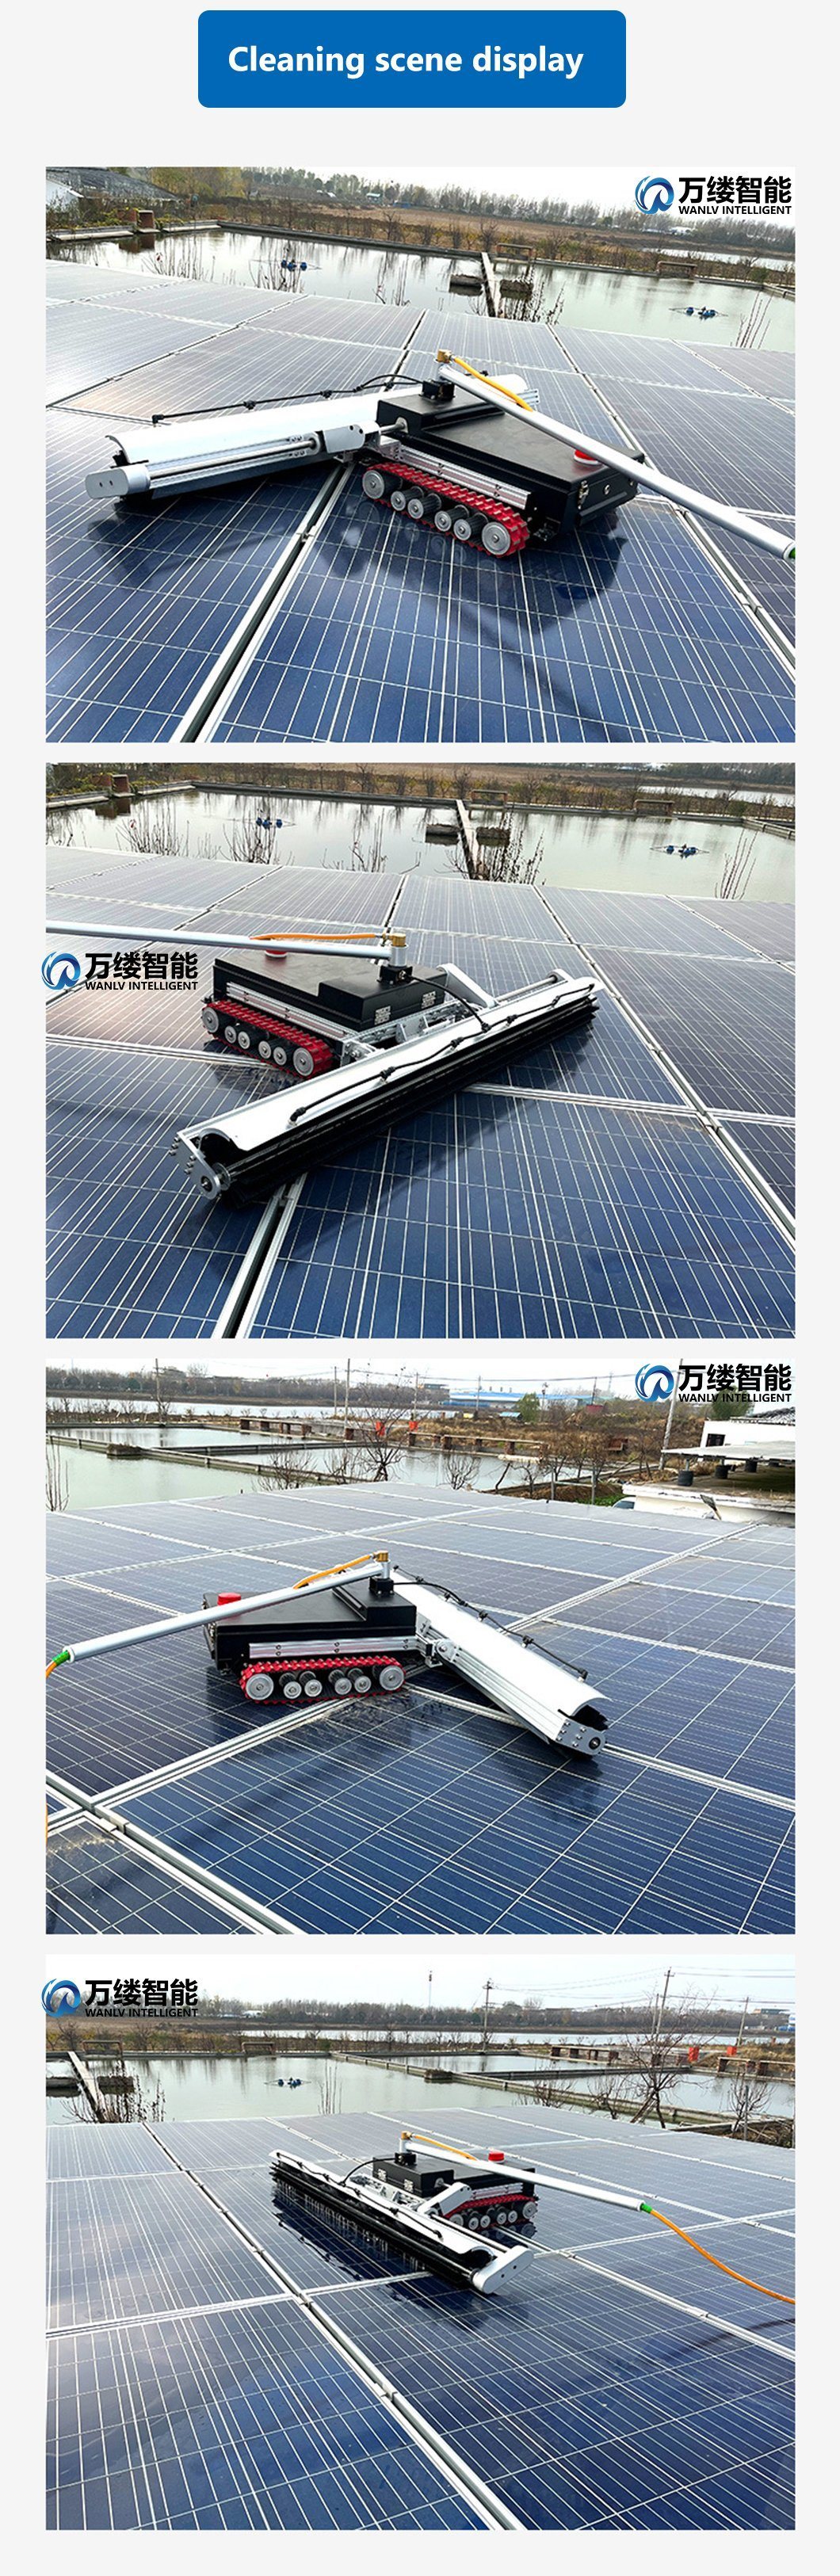 Solar Panel Cleaning Robot Photovoltaic Panel Cleaning Machine with Electric Solar Panel Cleaning Rotating Brush